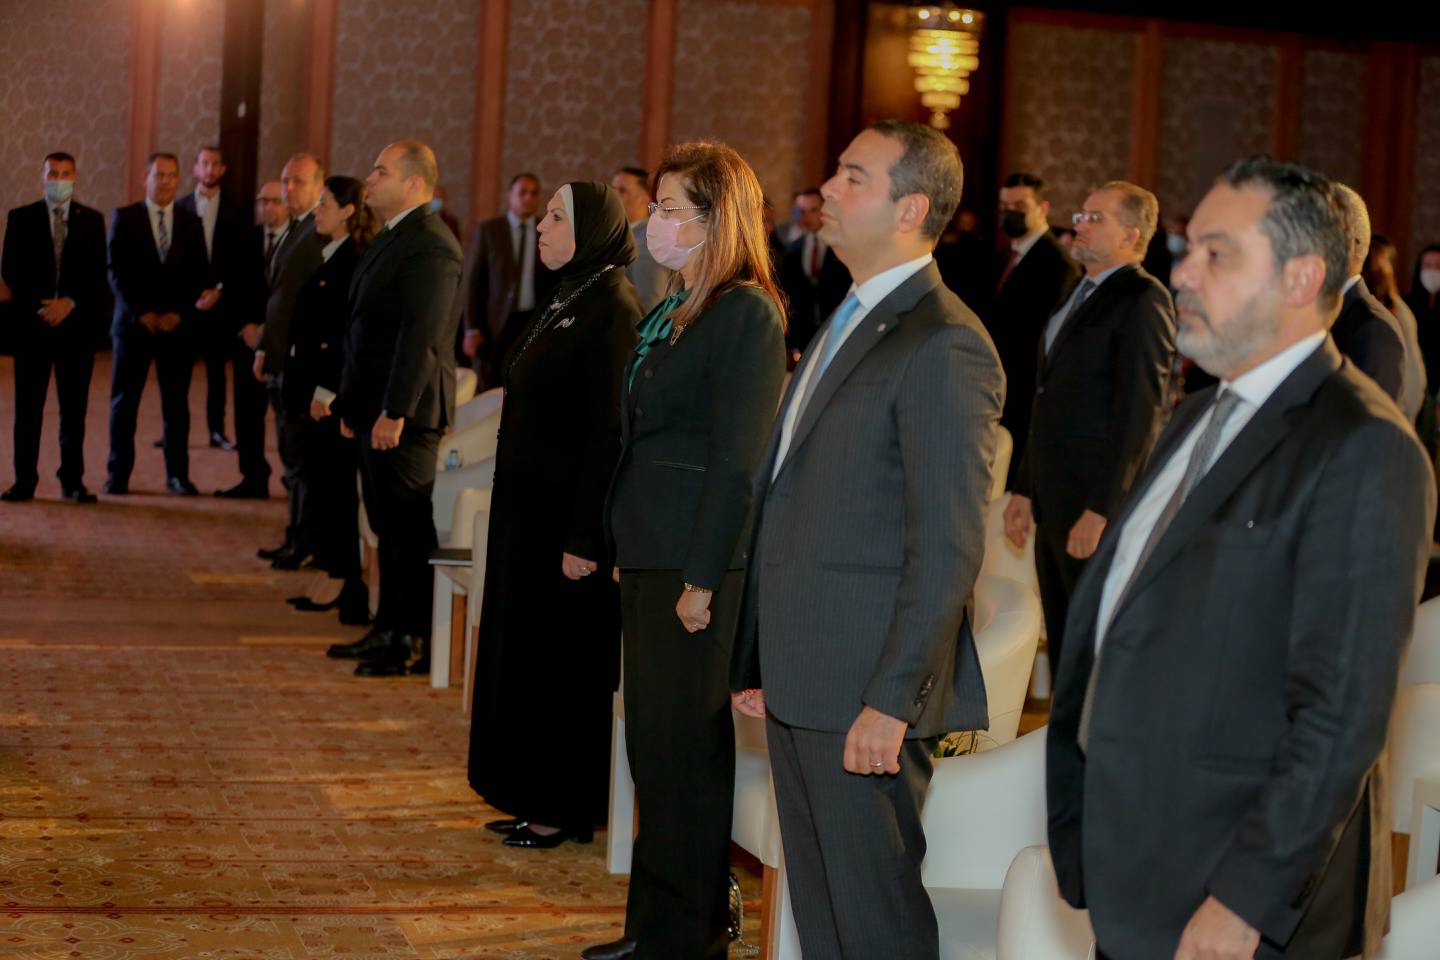 Speakers at the Egypt Economic Summit in Cairo on Tuesday included Egypt’s Minister of Trade and Industry Nevine Gamea, Minister of Planning and Economic Development Hala El Said and The Sovereign Fund of Egypt's chief executive Ayman Soliman. Photo: Egypt Economic Summit